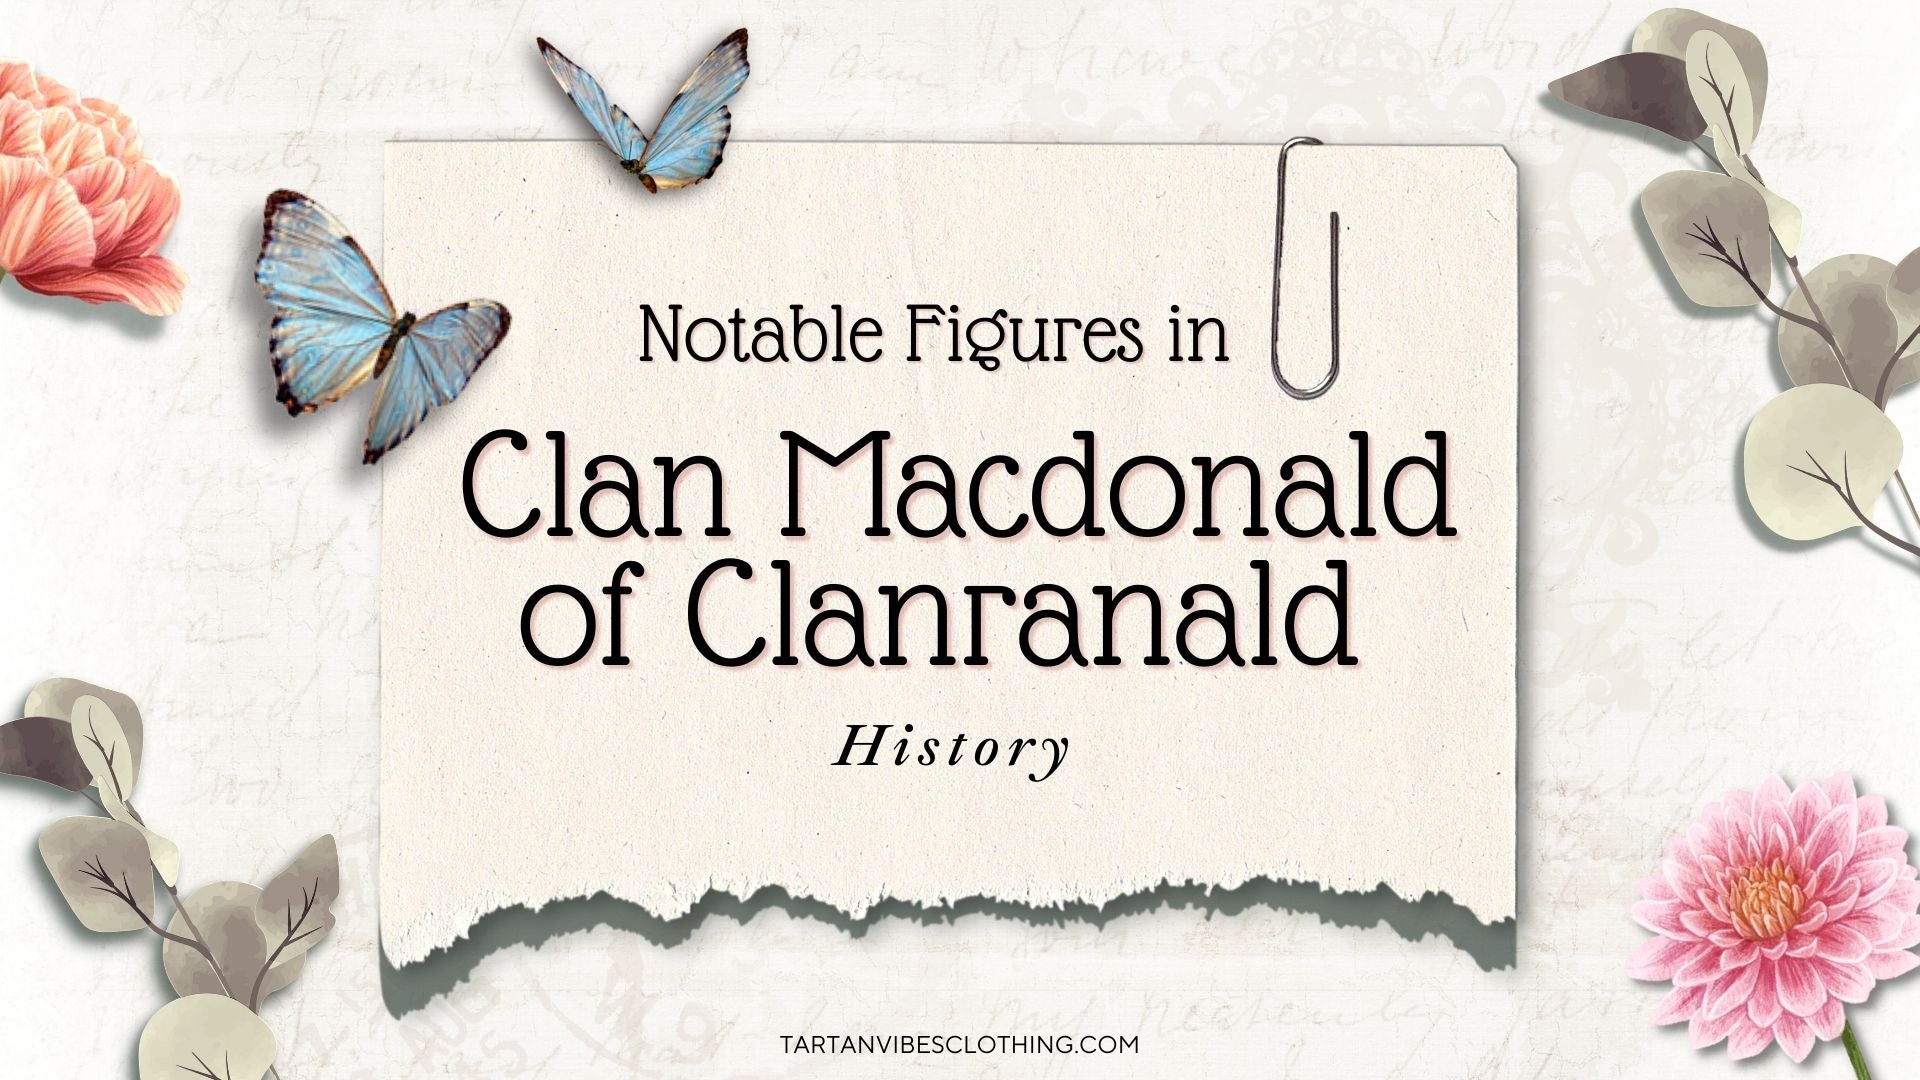 Notable Figures in Clan Macdonald of Clanranald History